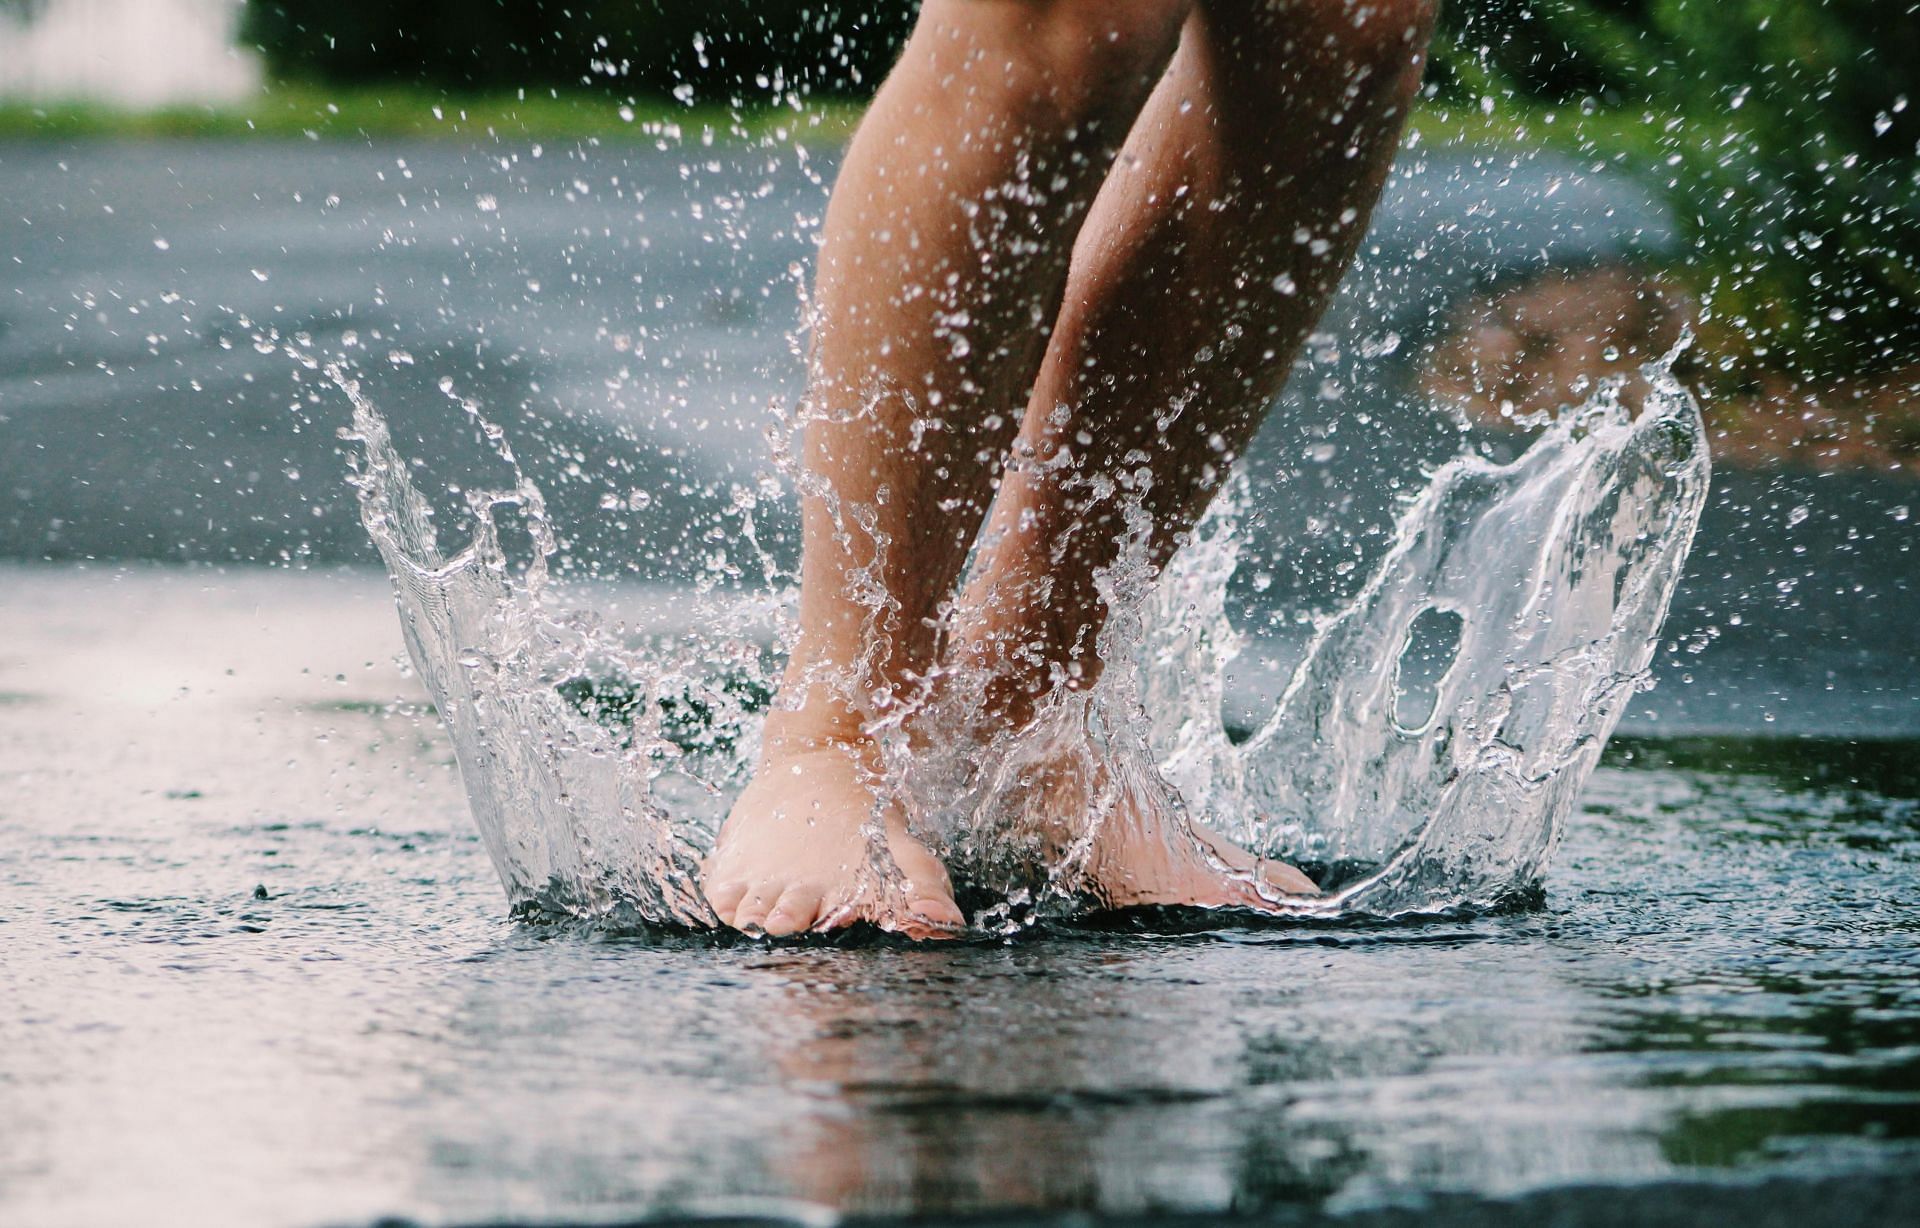 causes of swollen feet and ankles (image sourced via Pexels / Photo by noelle)